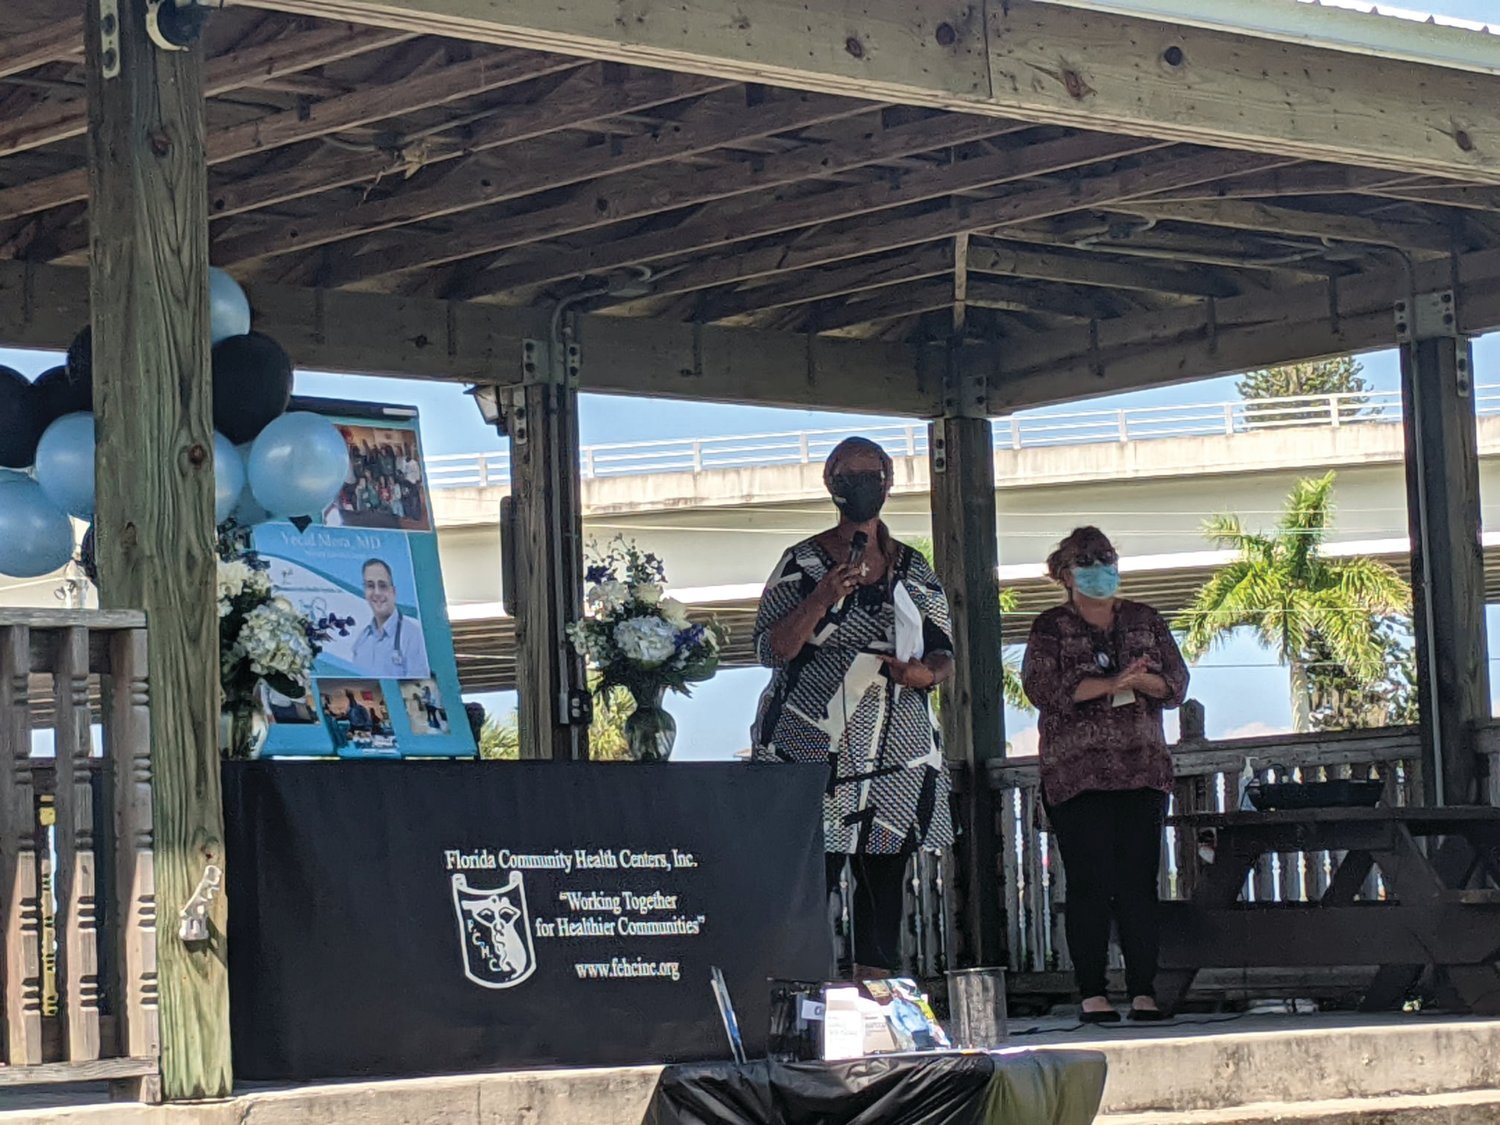 MOORE HAVEN — On Oct. 8, Florida Community Health Centers encouraged community members to gather (with social distancing and masks) in the Moore Haven City Park, 201 Riverside Drive, to pay their respects to Dr. Yecid Mora.